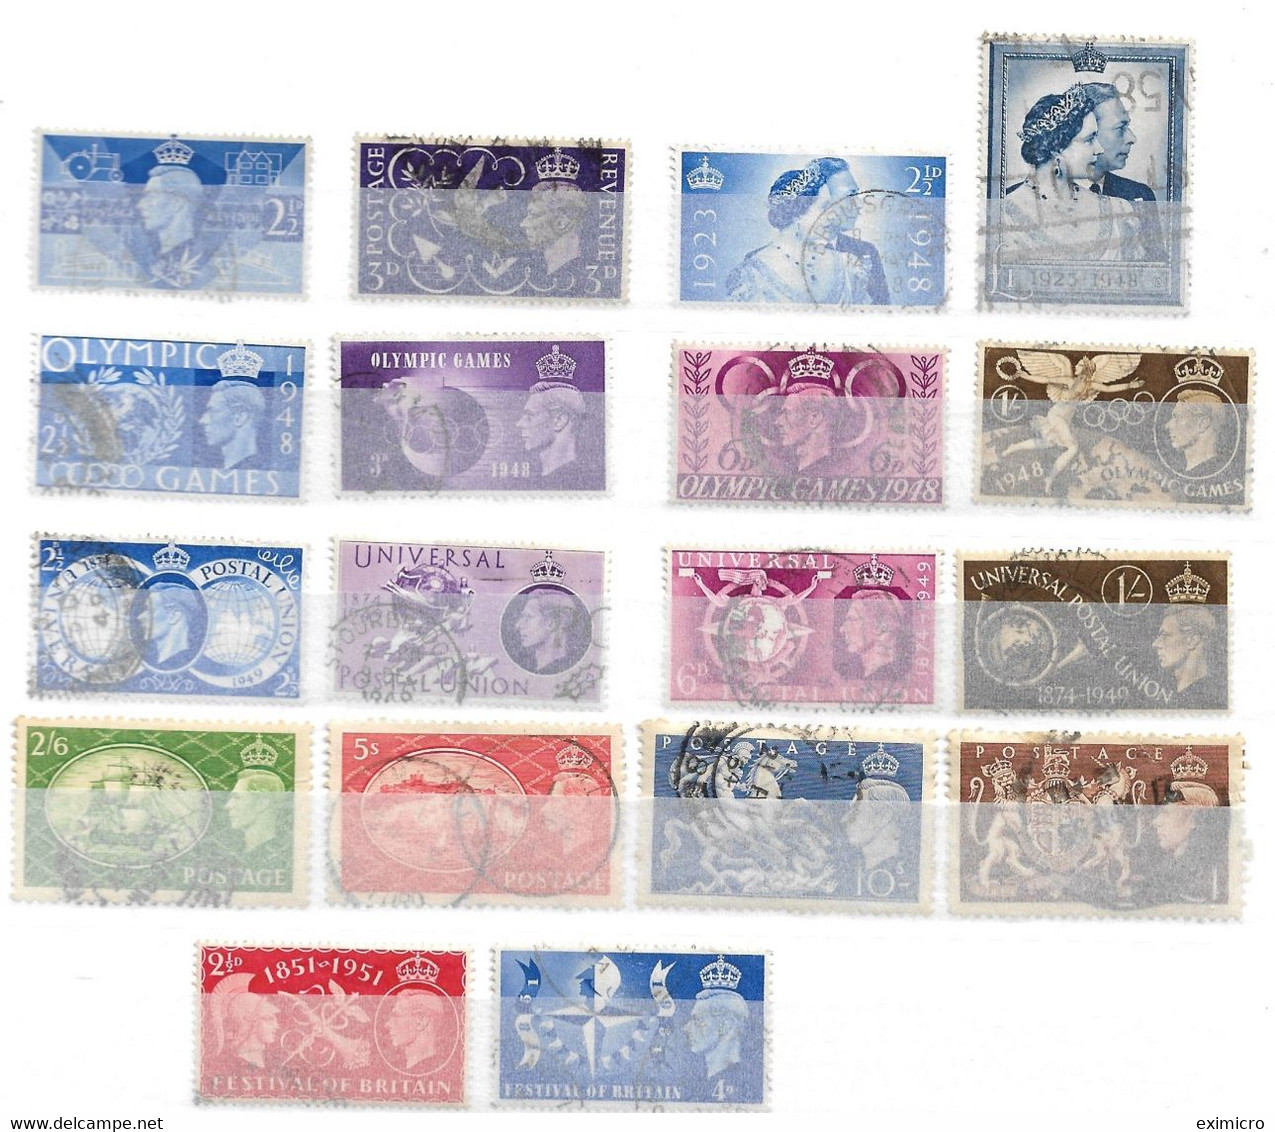 GREAT BRITAIN KING EDWARD VIII + GEORGE VI FINE USED COLLECTION OF SETS ON A DOUBLE-SIDED STOCK SHEET Cat £154+ - Sammlungen